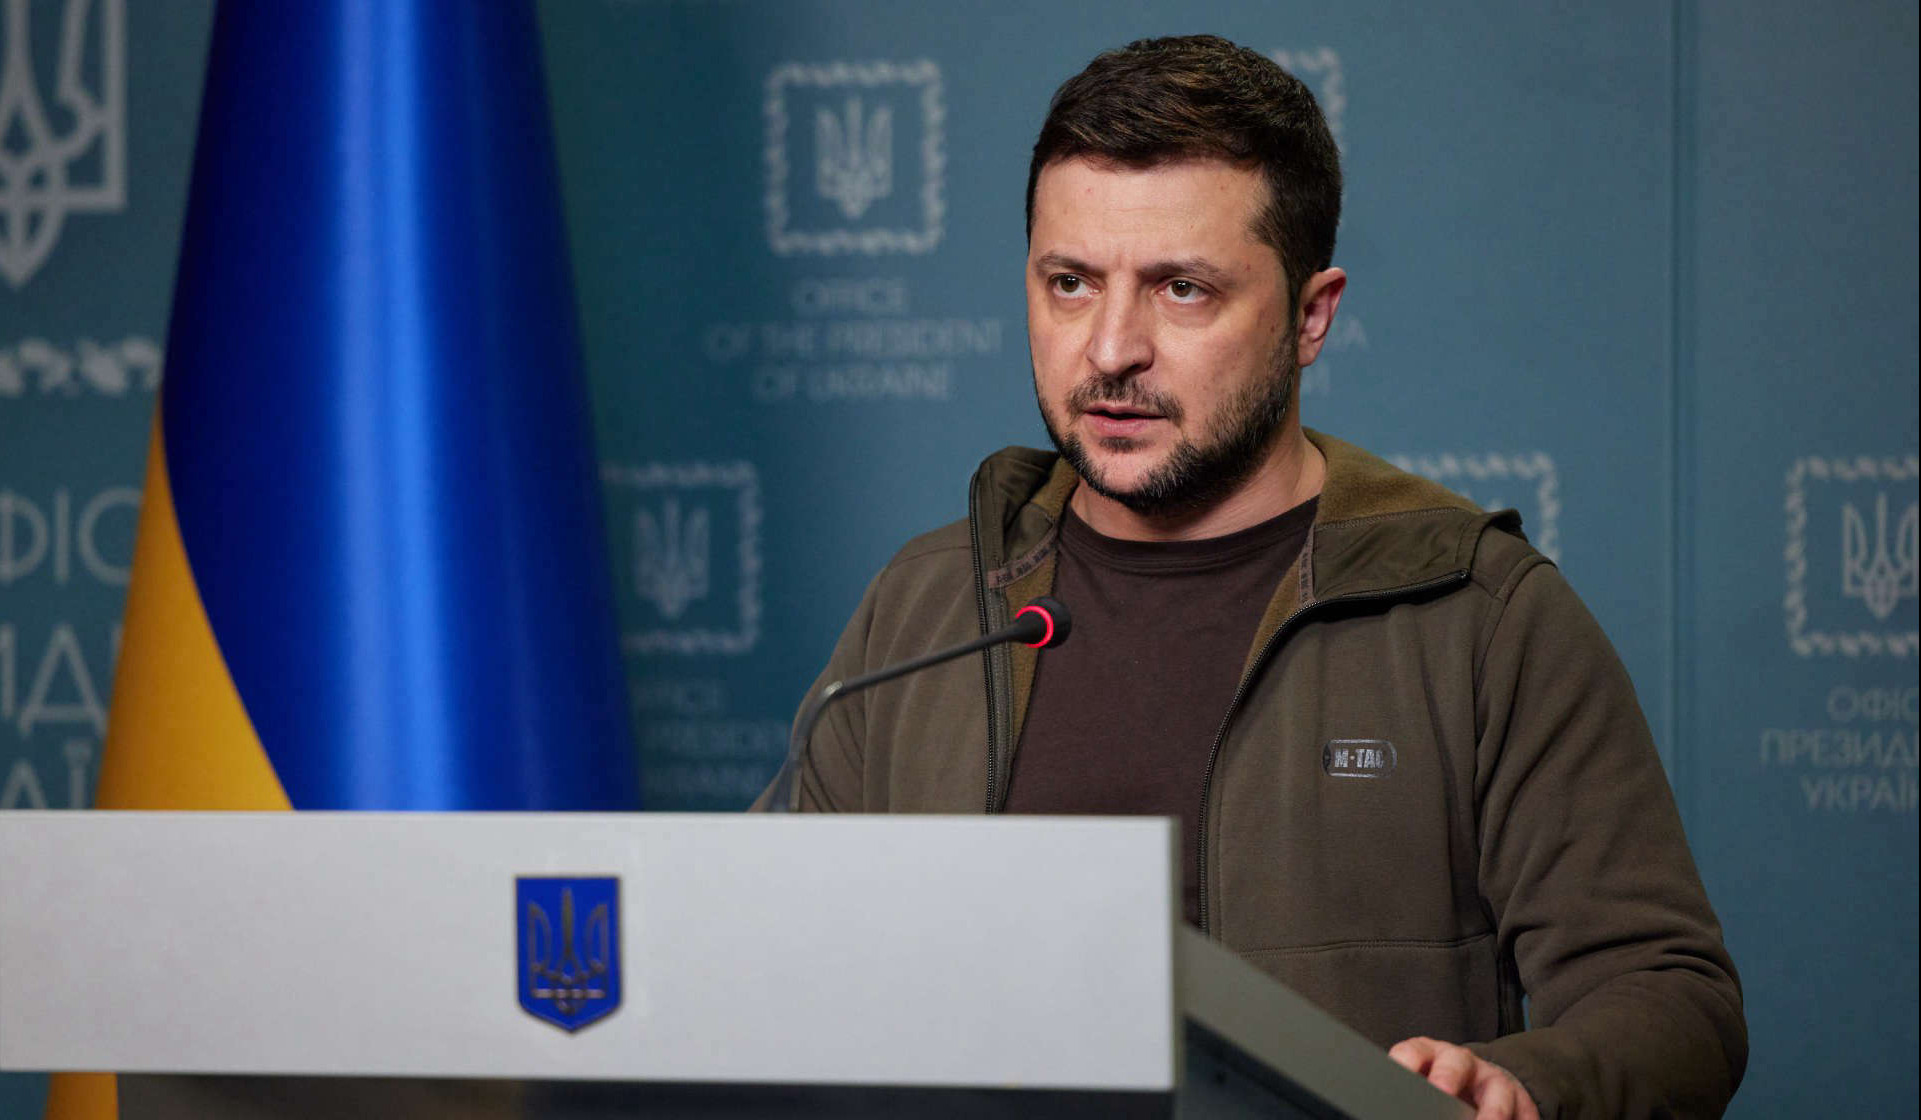 Ukrainian Armed Forces do not carry out military operations in Russia: Zelensky